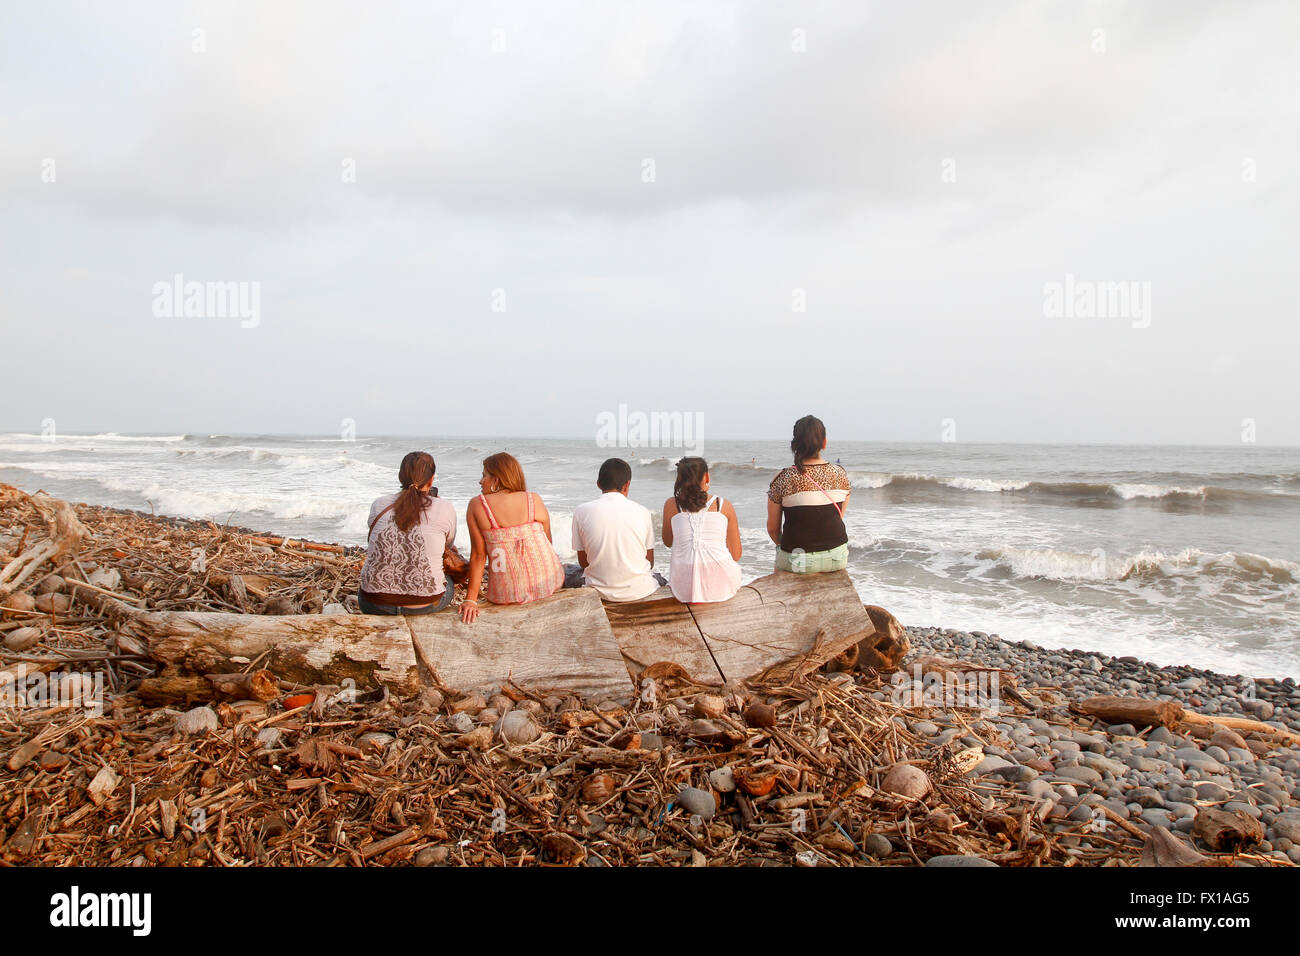 Group of European tourists at leisure. Photographed at El Tunco beach, El Salvador, Stock Photo